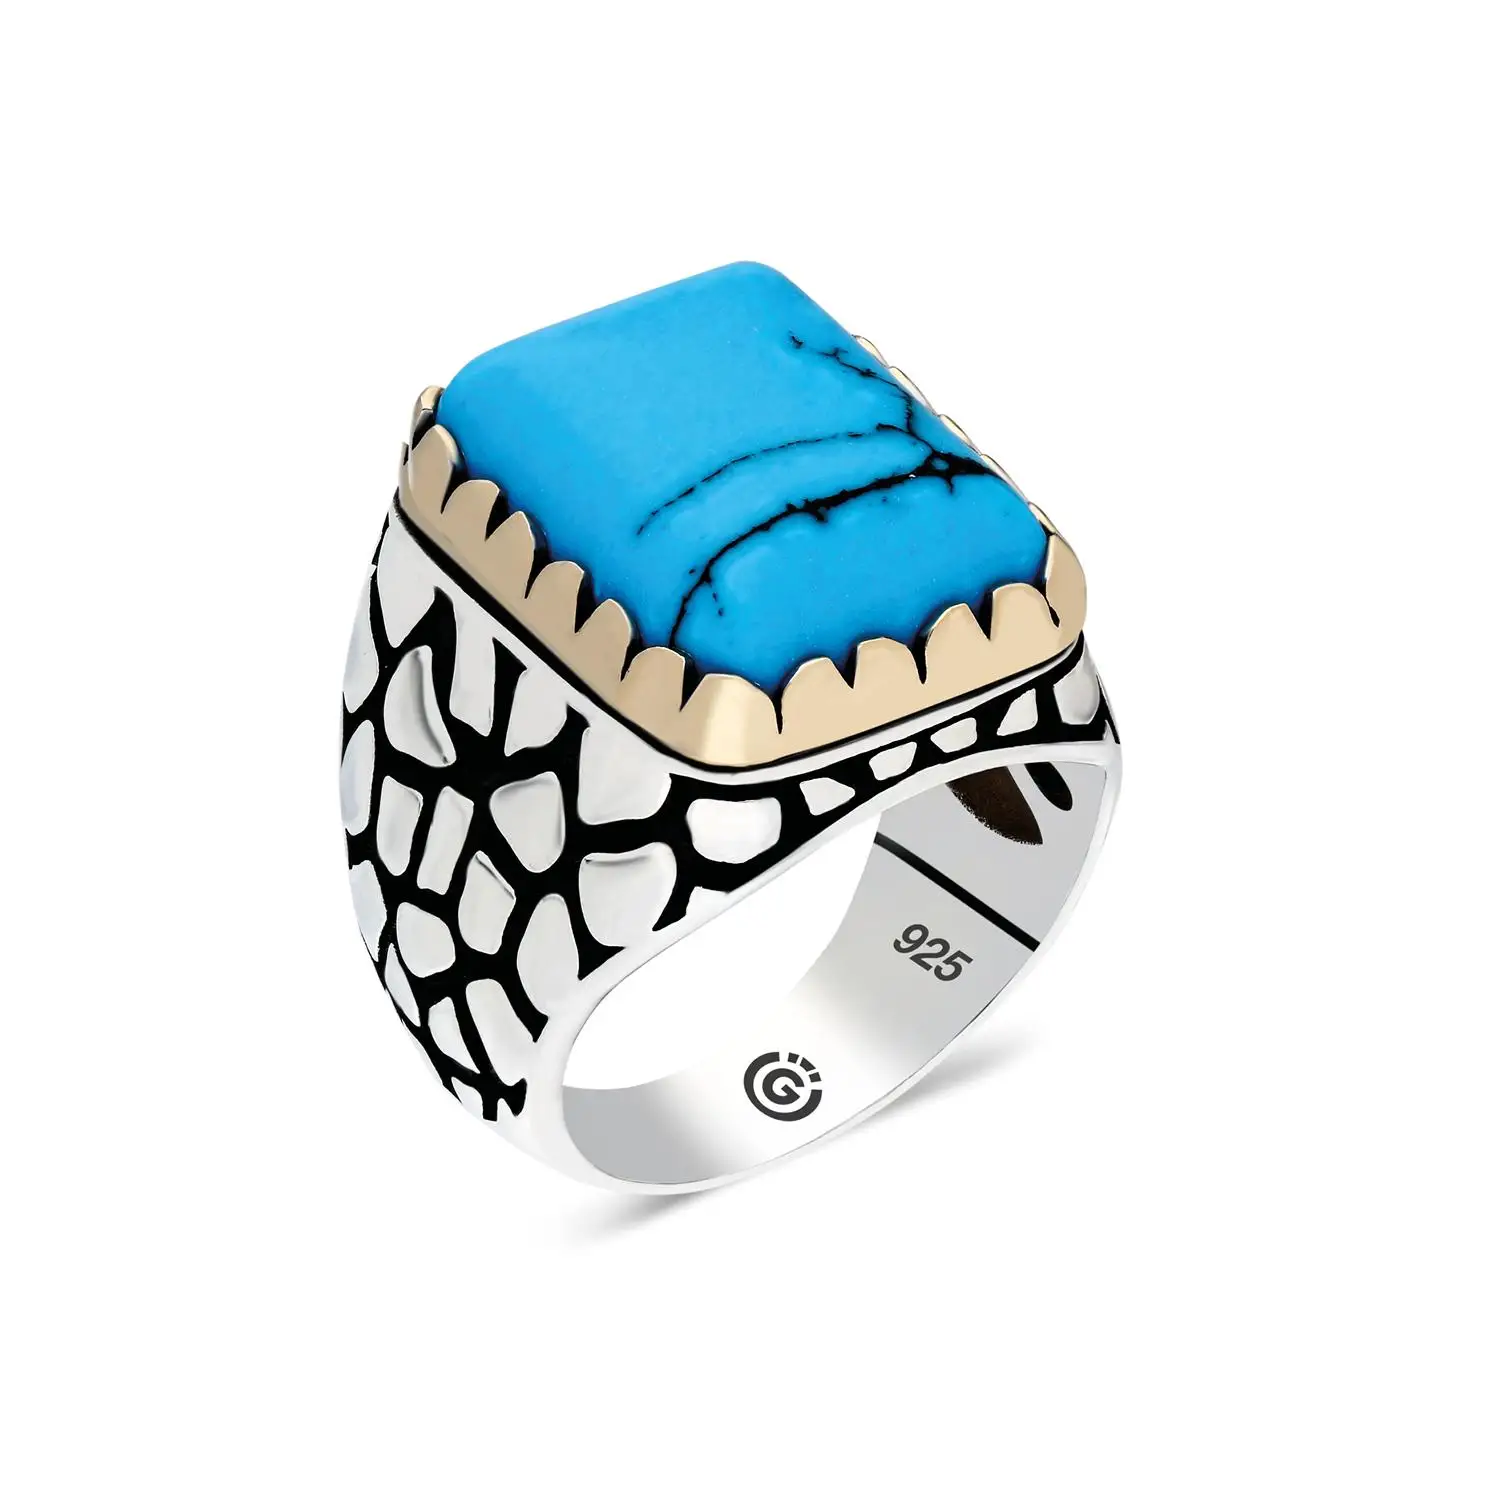 

Solid 925 Sterling Silver Ring with Raw Rectangle Blue Turquoise Gemstone and Dalmatian Motif for Men Accessories Long Lasting